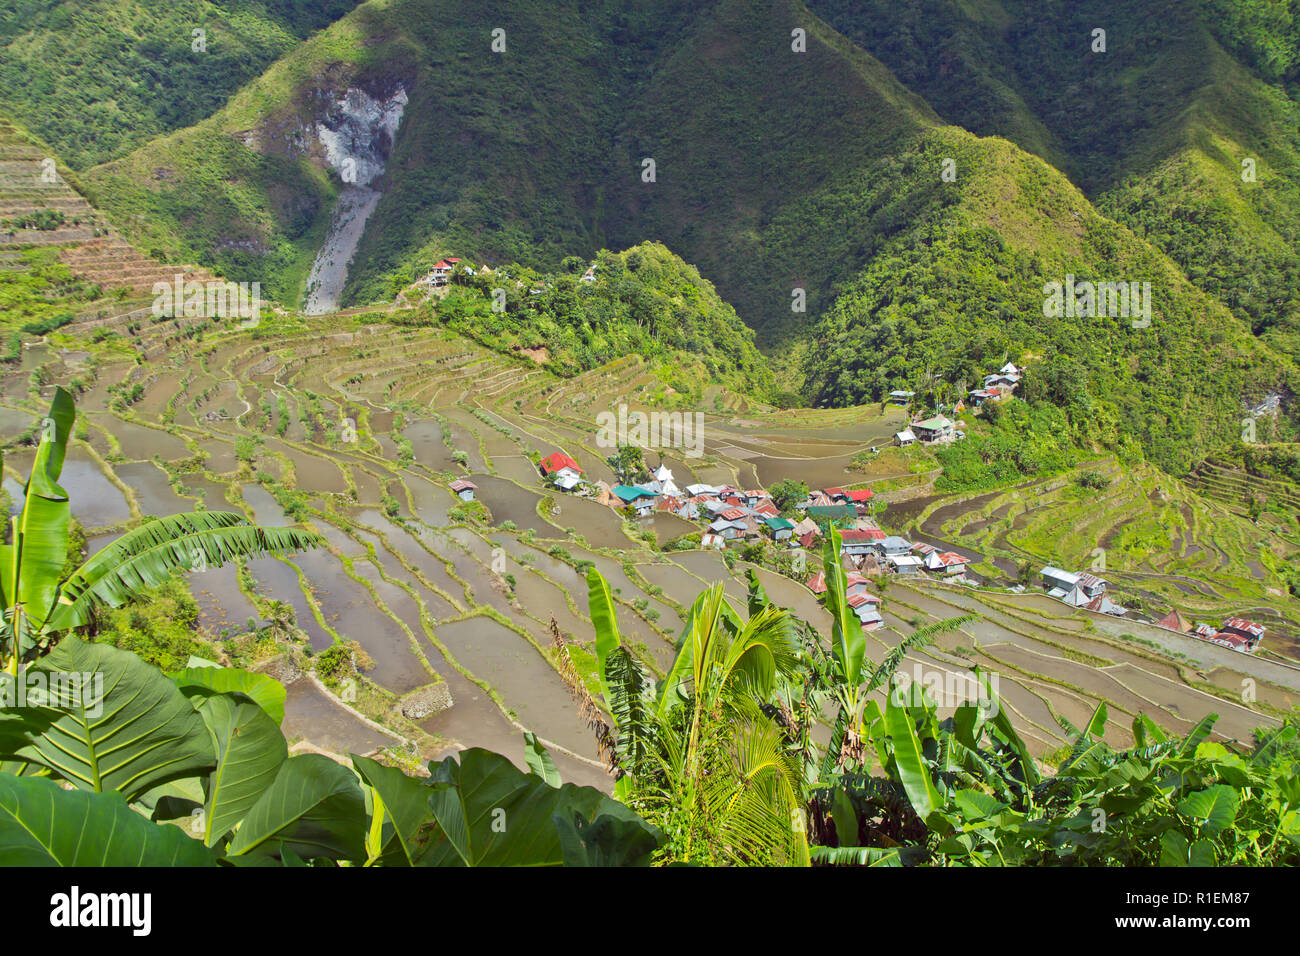 Batad is a remote village of around 1500 people in Ifugao province. It's said to be home to the best and most well-preserved rice terraces Stock Photo